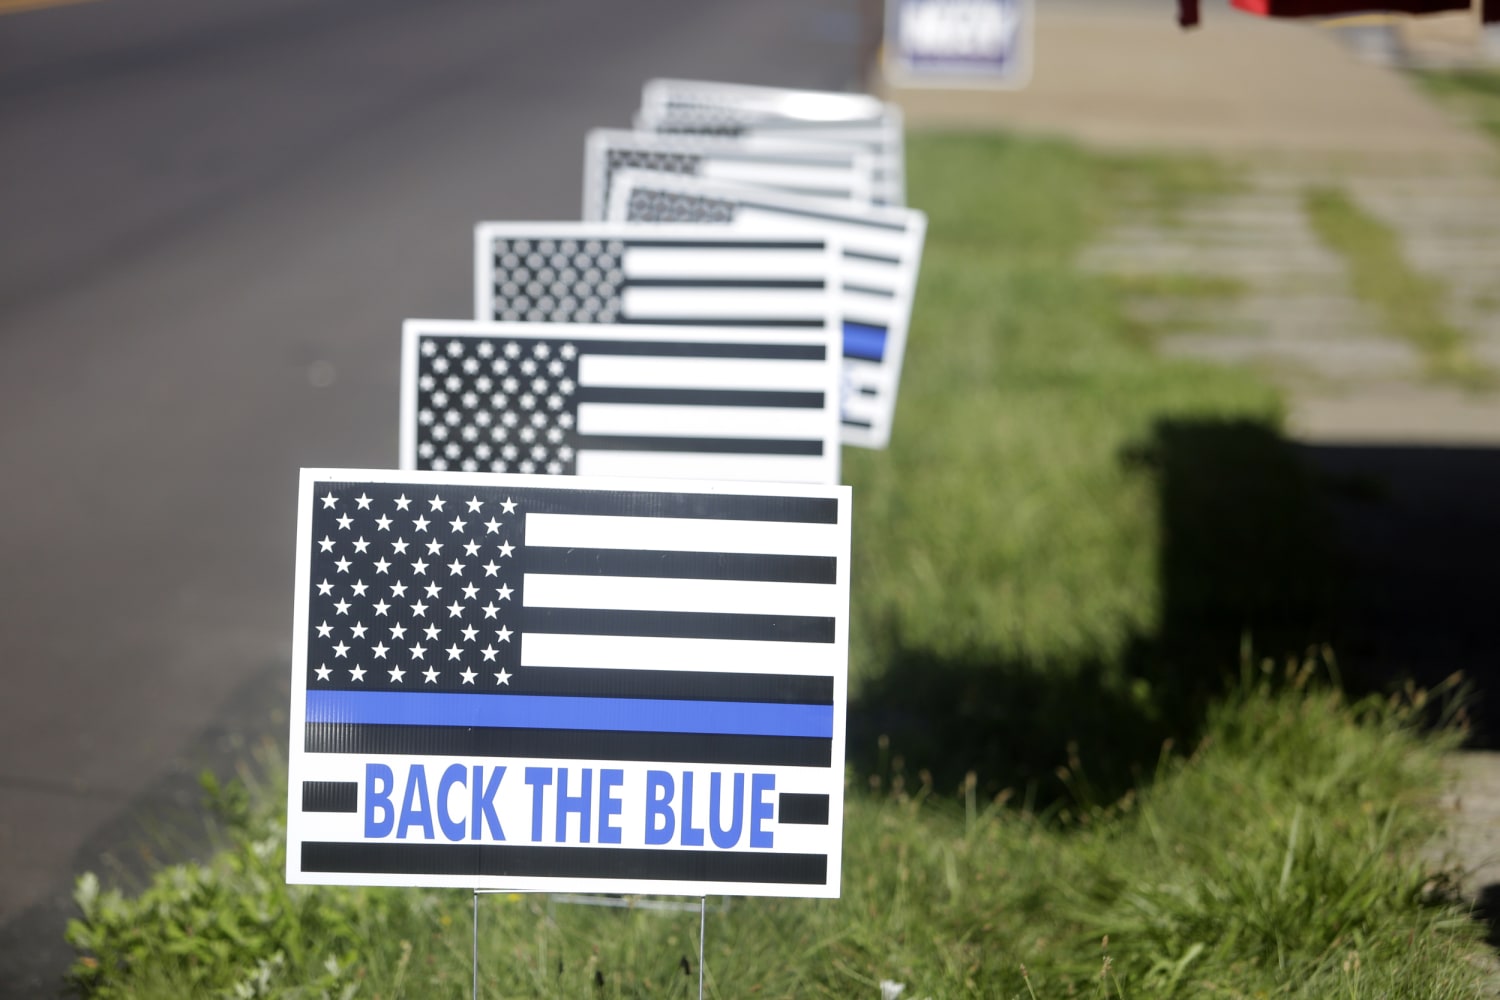 Woman charged with hate crime for stepping on pro-police 'Back the Blue' sign in Utah